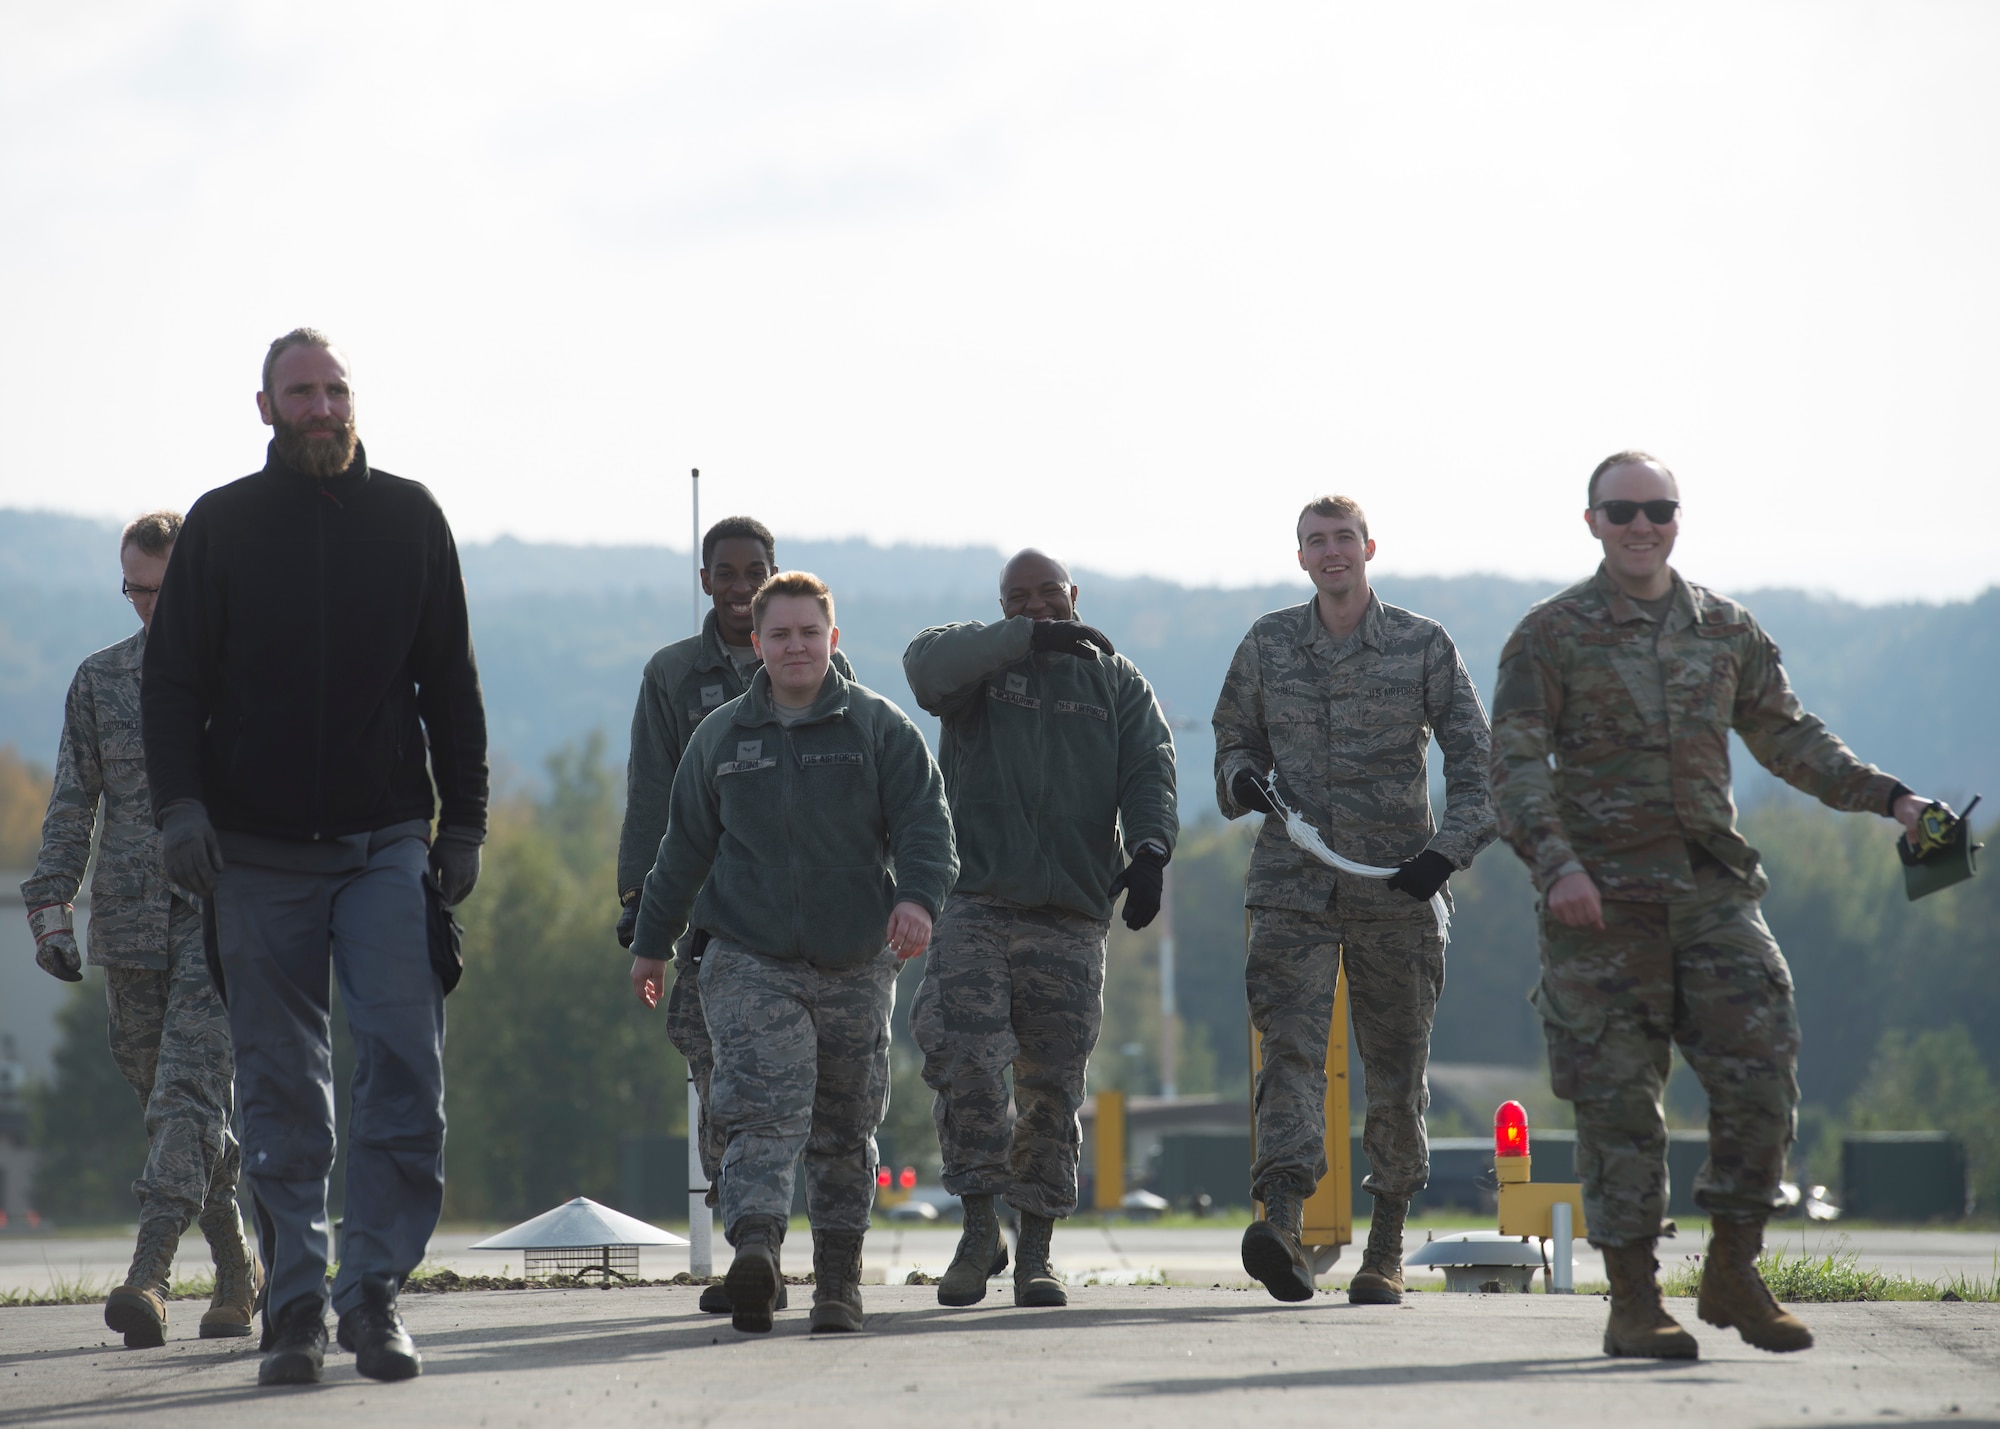 Members of the 786th Civil Engineer Squadron walk back to their cars after finishing runway maintenance at Ramstein Air Base, Germany, Oct. 28, 2019. Making sure the aircraft arresting system is ready at any moment is a daily job for power production technicians.